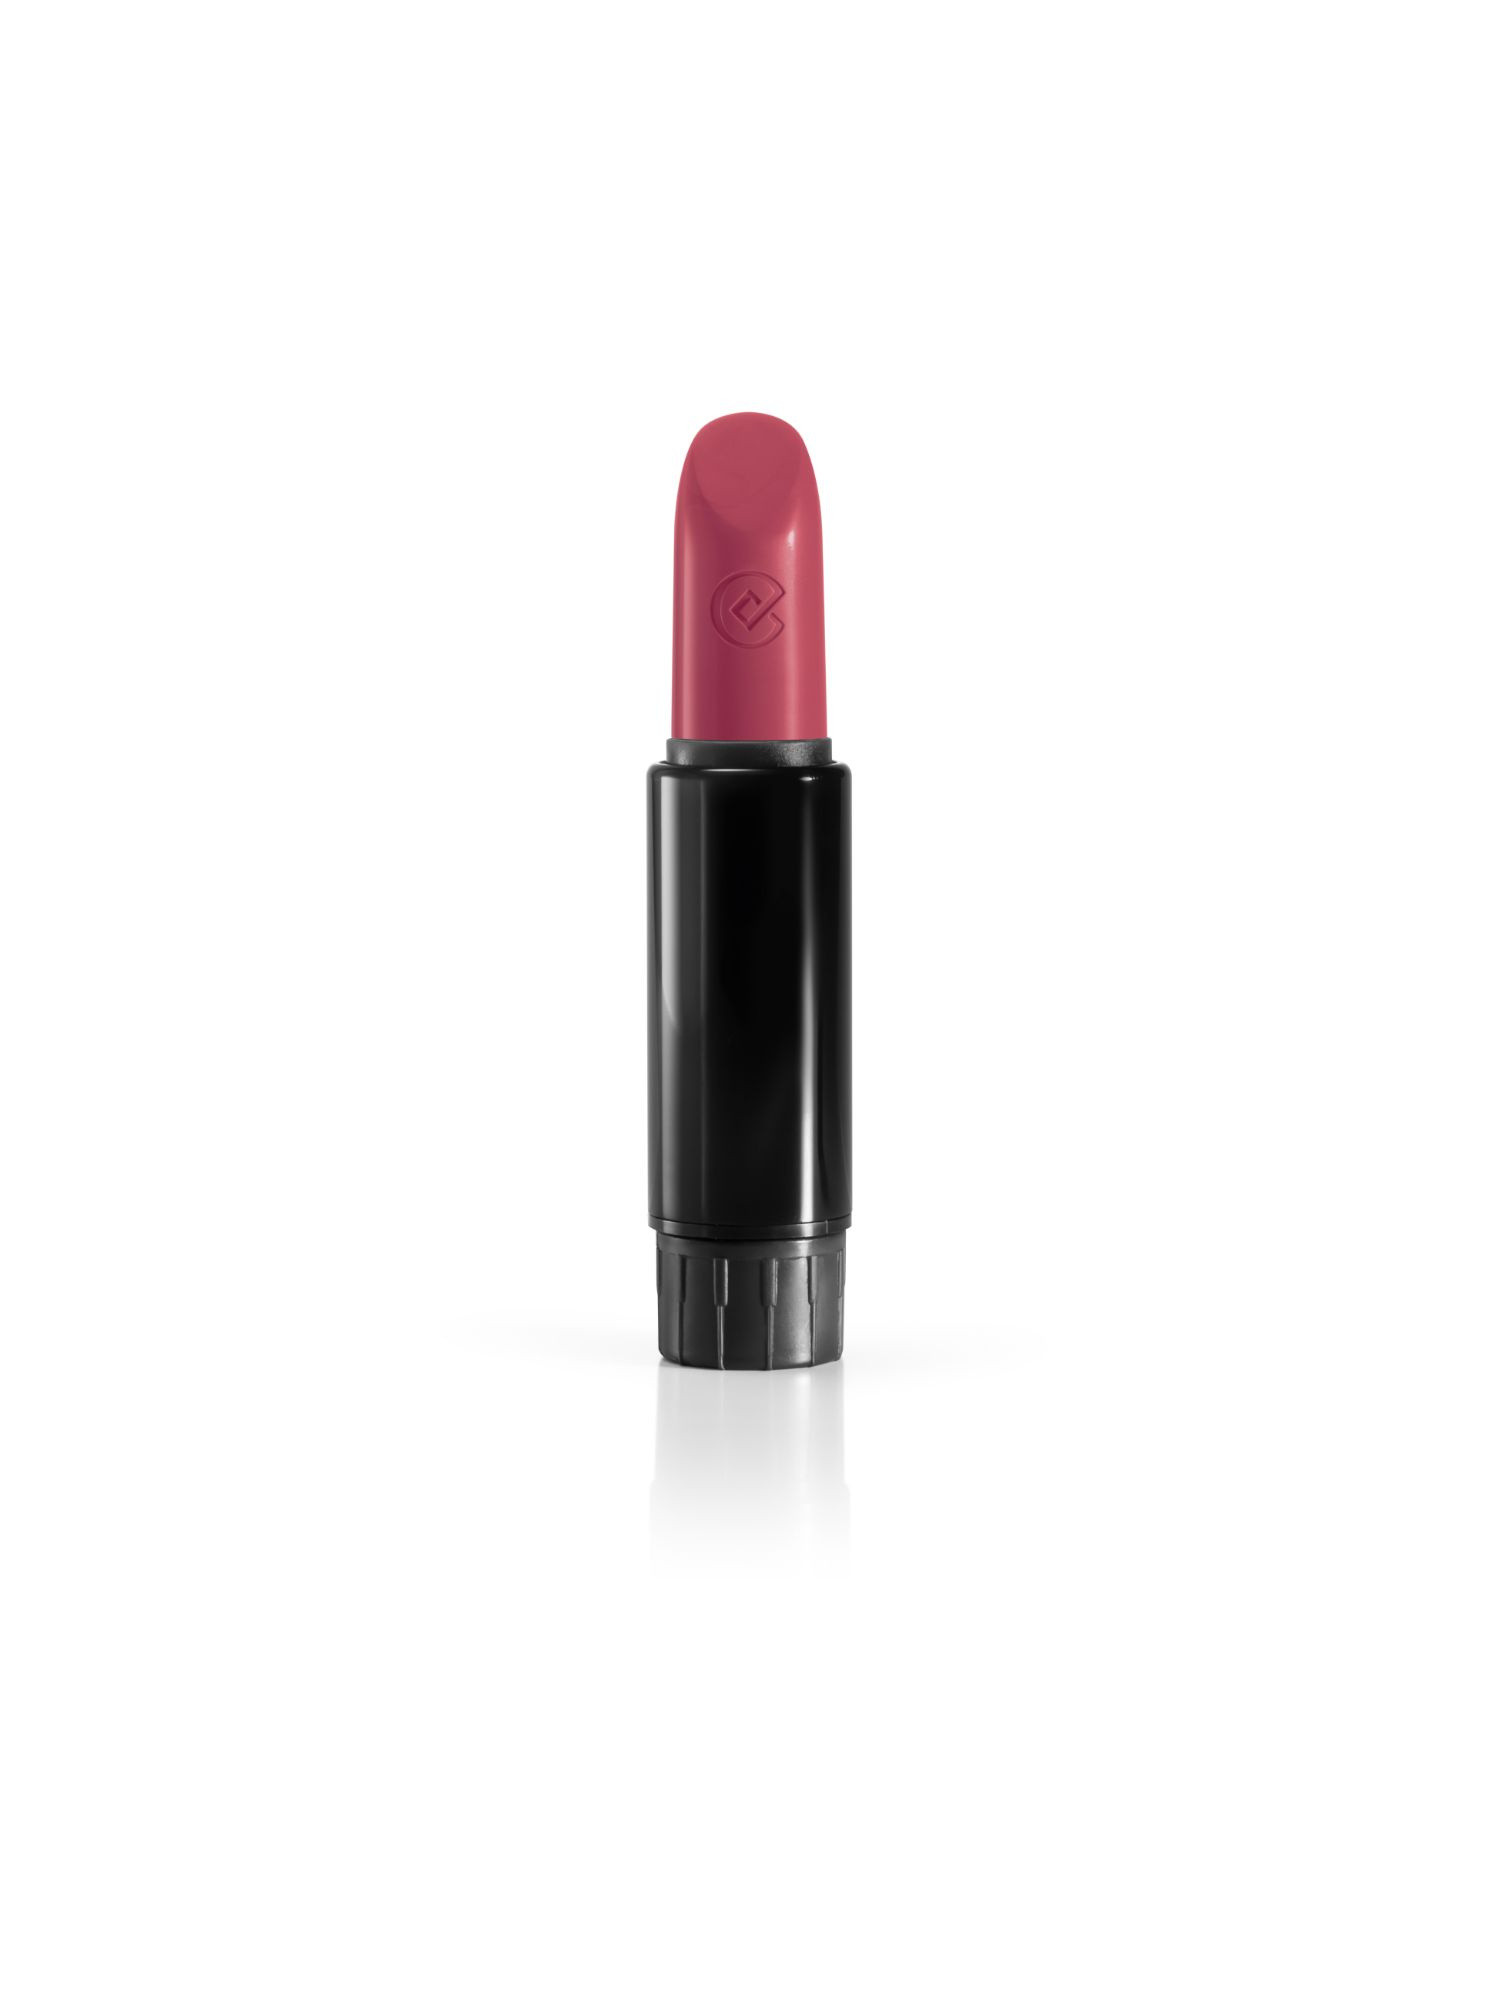 Rossetto puro refill - 113 Autumn berry, Naturale, large image number 0